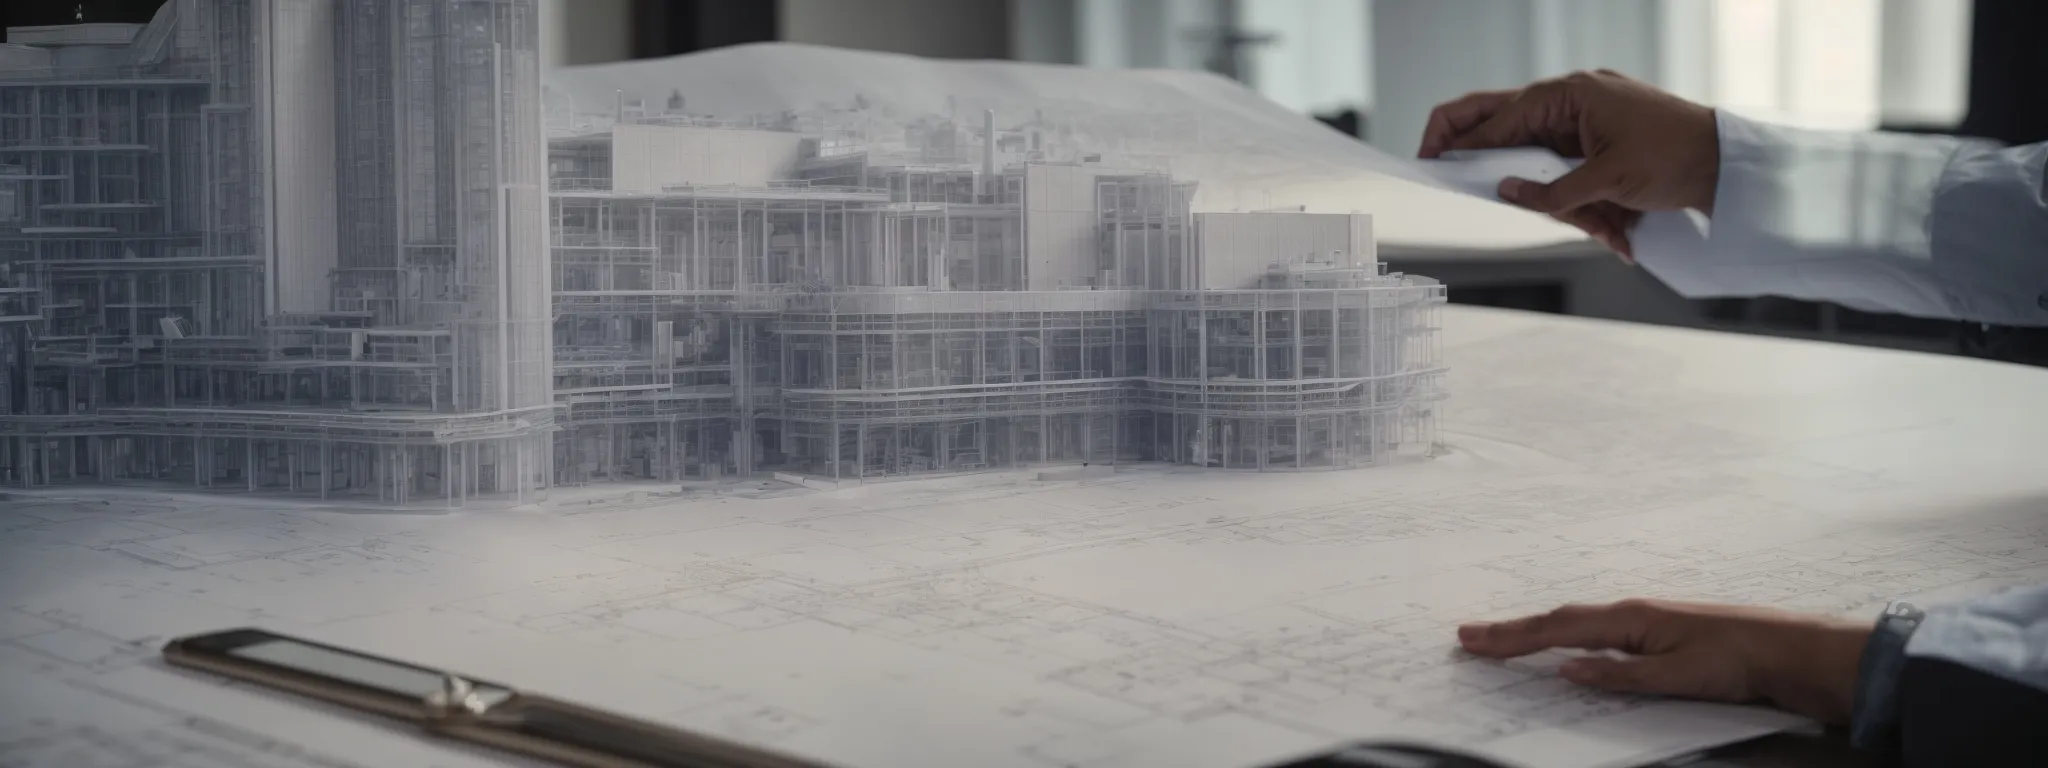 an architect reviews site blueprints of a robust, scalable building layout on a tablet.